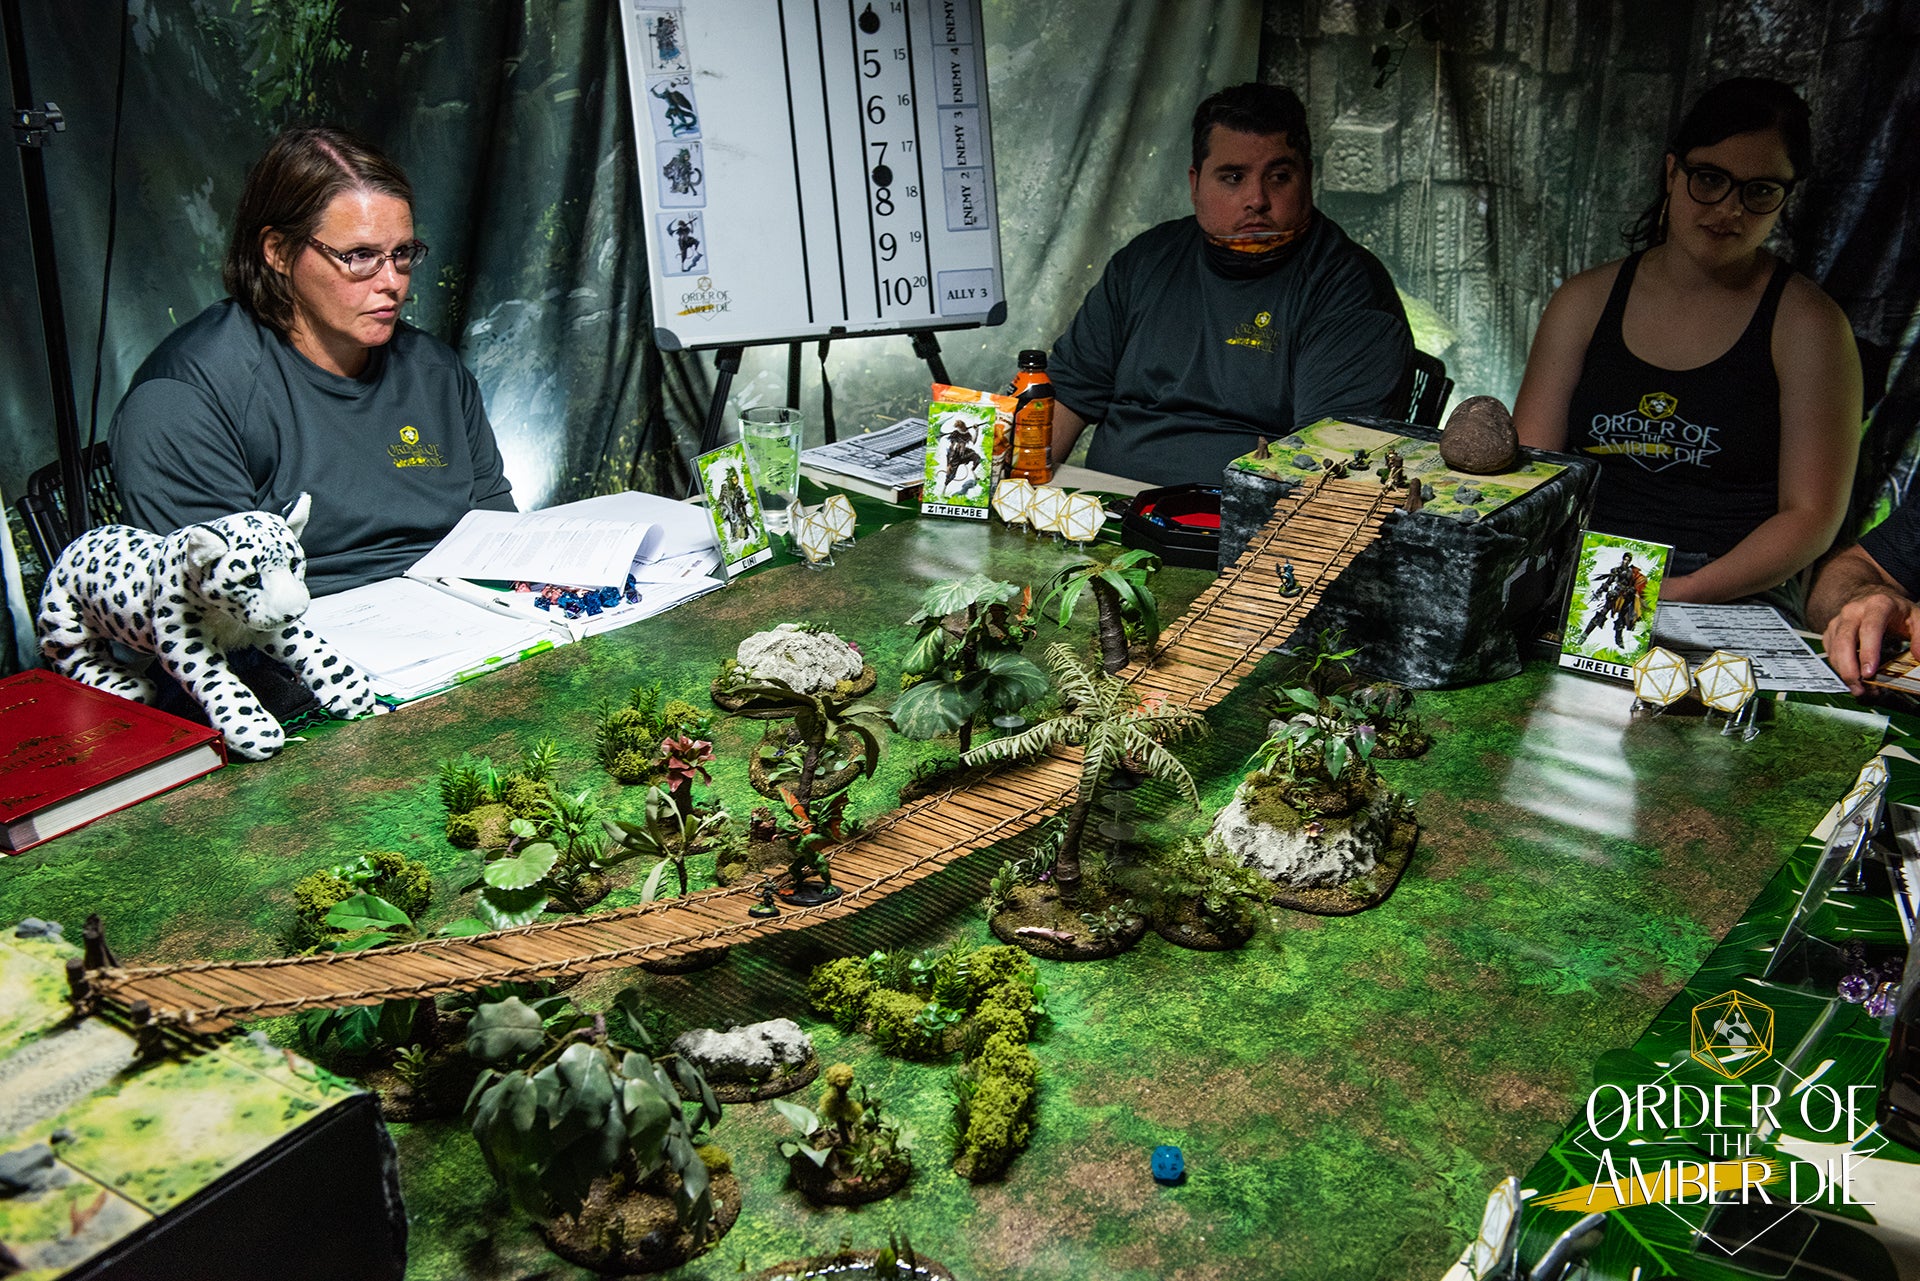 The order of the Amber Die players sit around a table decorated with mini figures and landscaping to represent a jungle